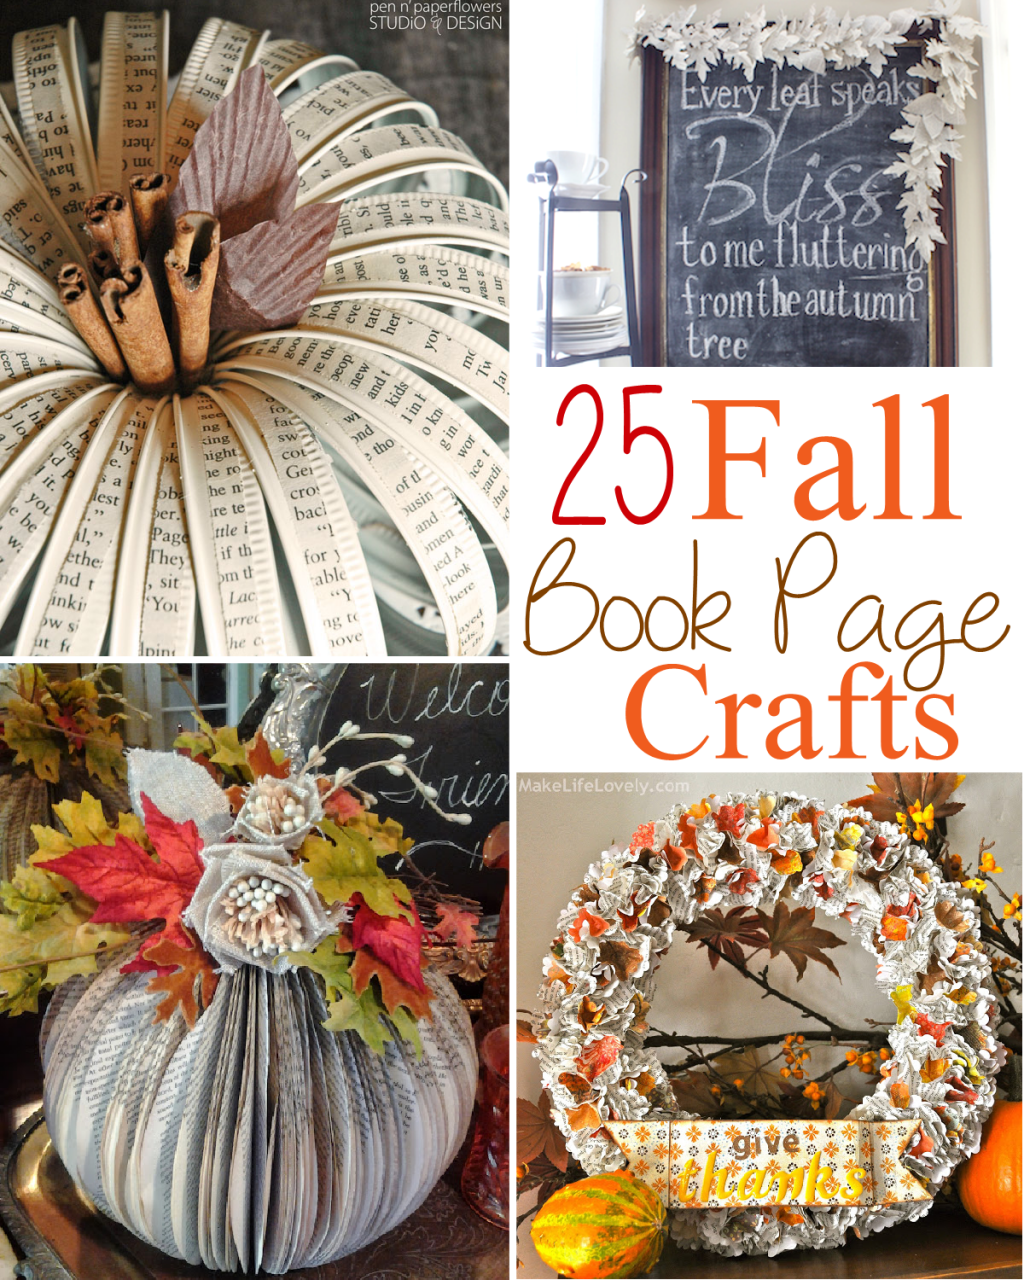 25 Fall Book Page Crafts - The Scrap Shoppe